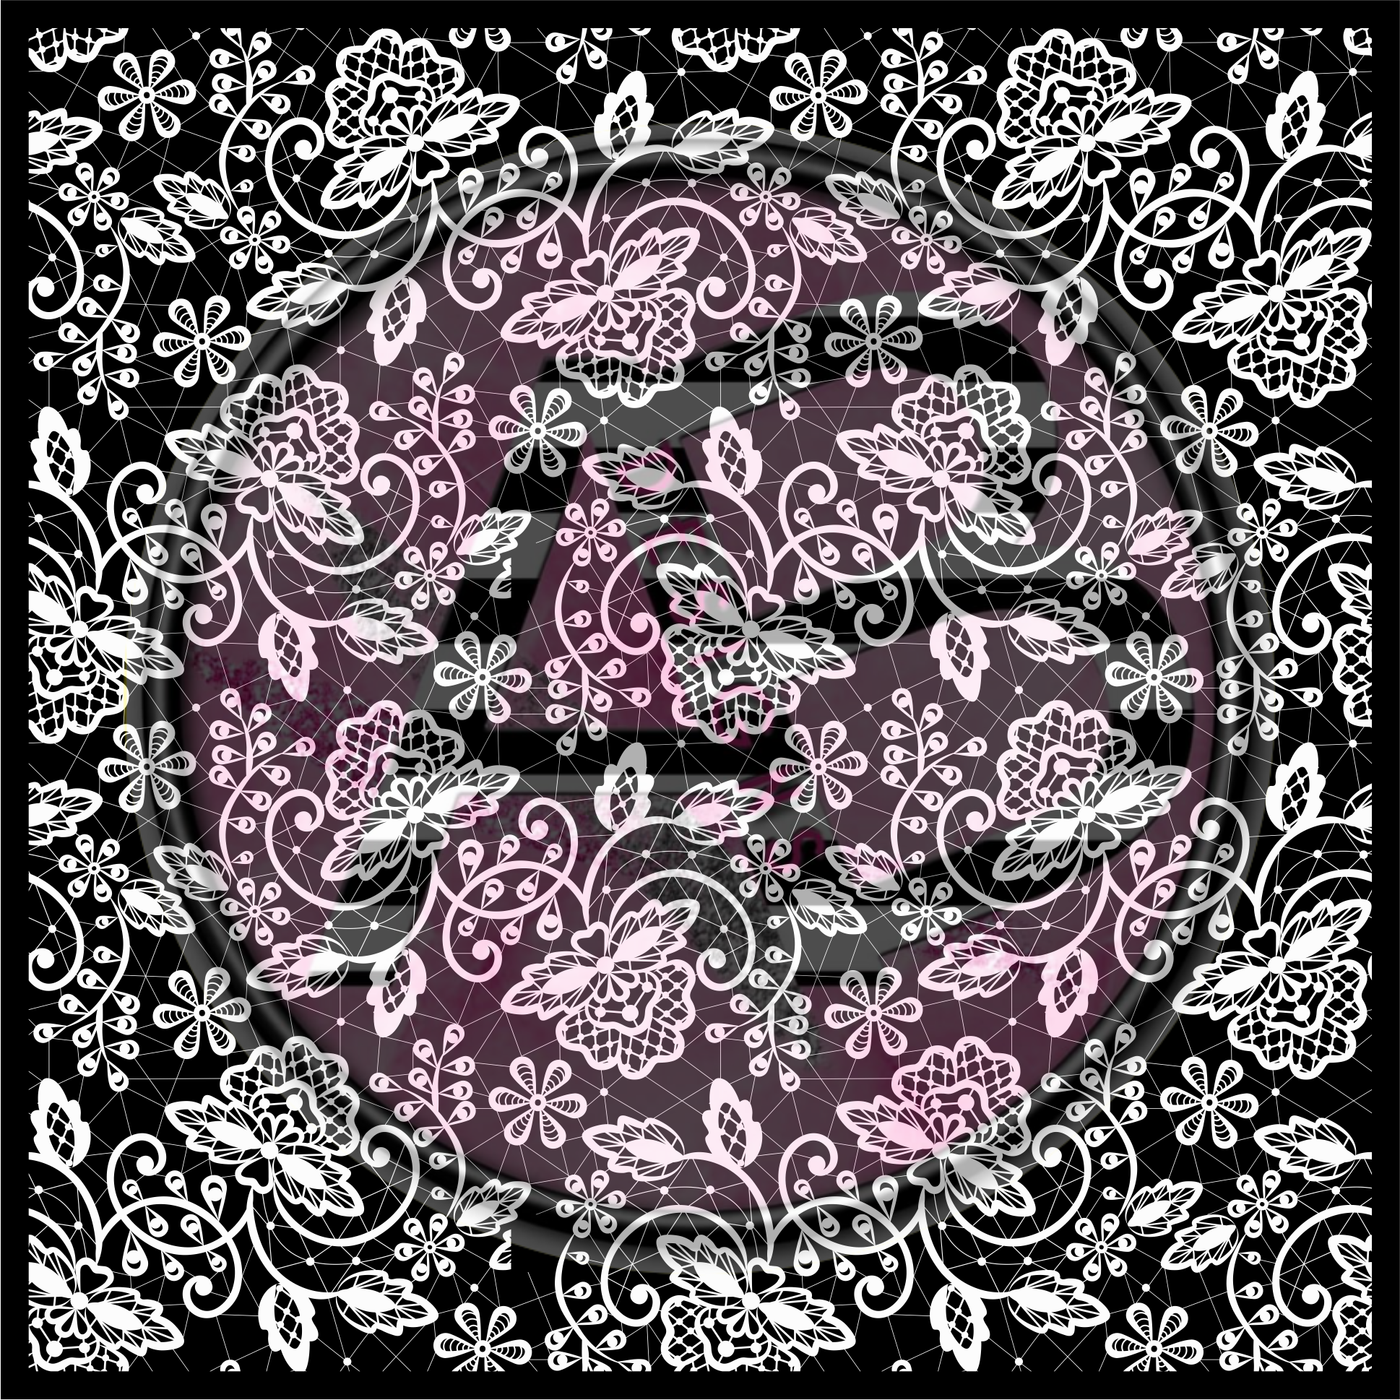 Adhesive Patterned Vinyl - White Ink Lace 09